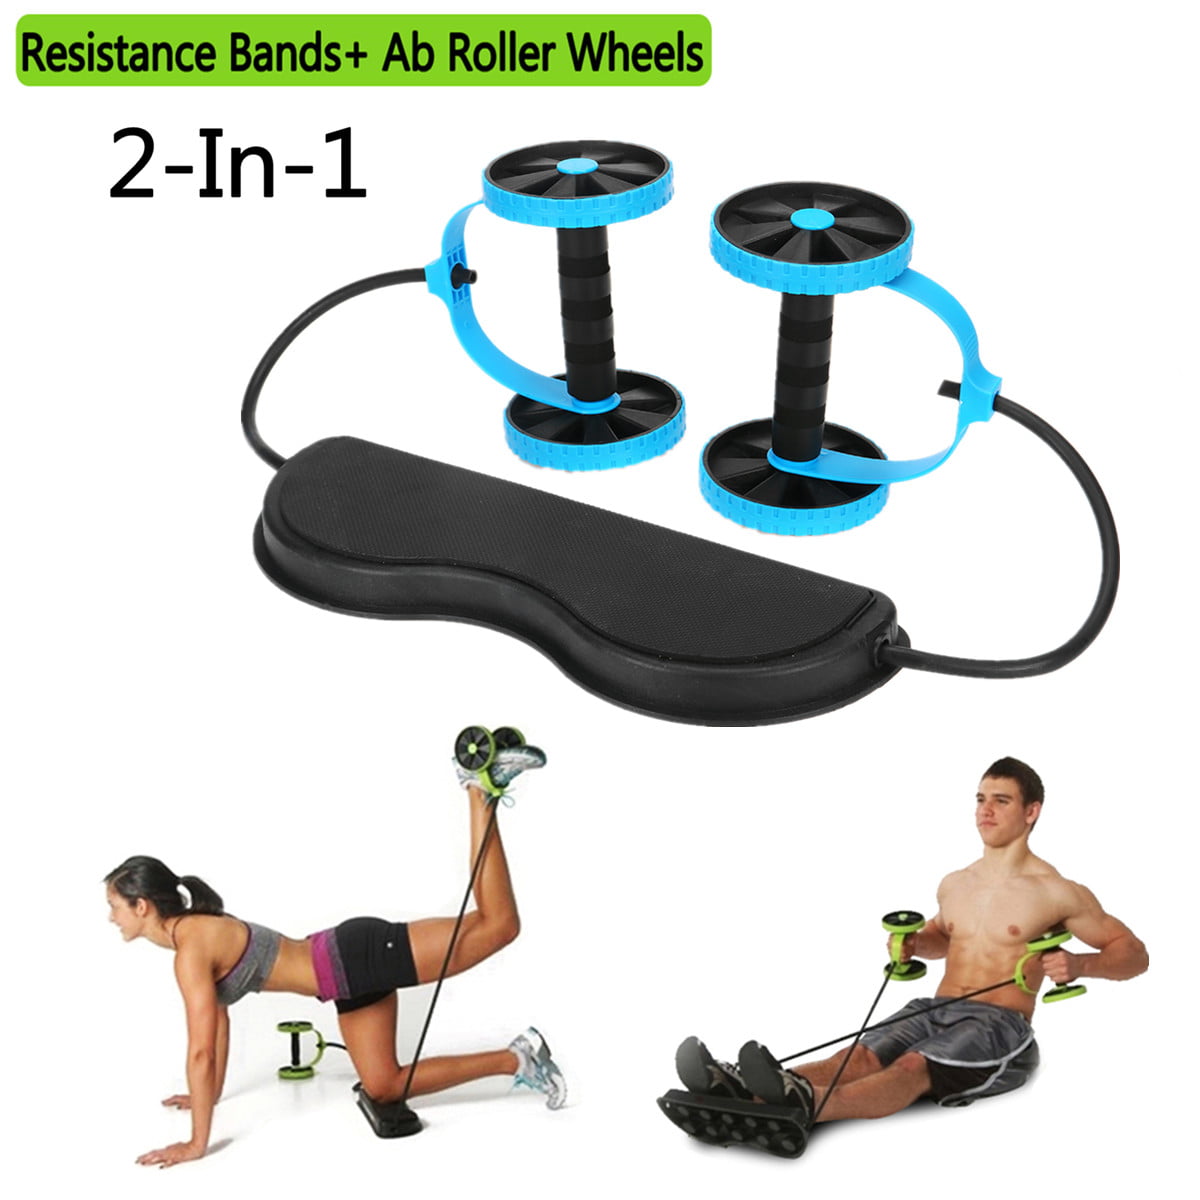 DOUBLE ABDOMINAL CORE EXERCISE ROLLER WHEEL MUSCLE FITNESS STRENGTH EXERCISER 